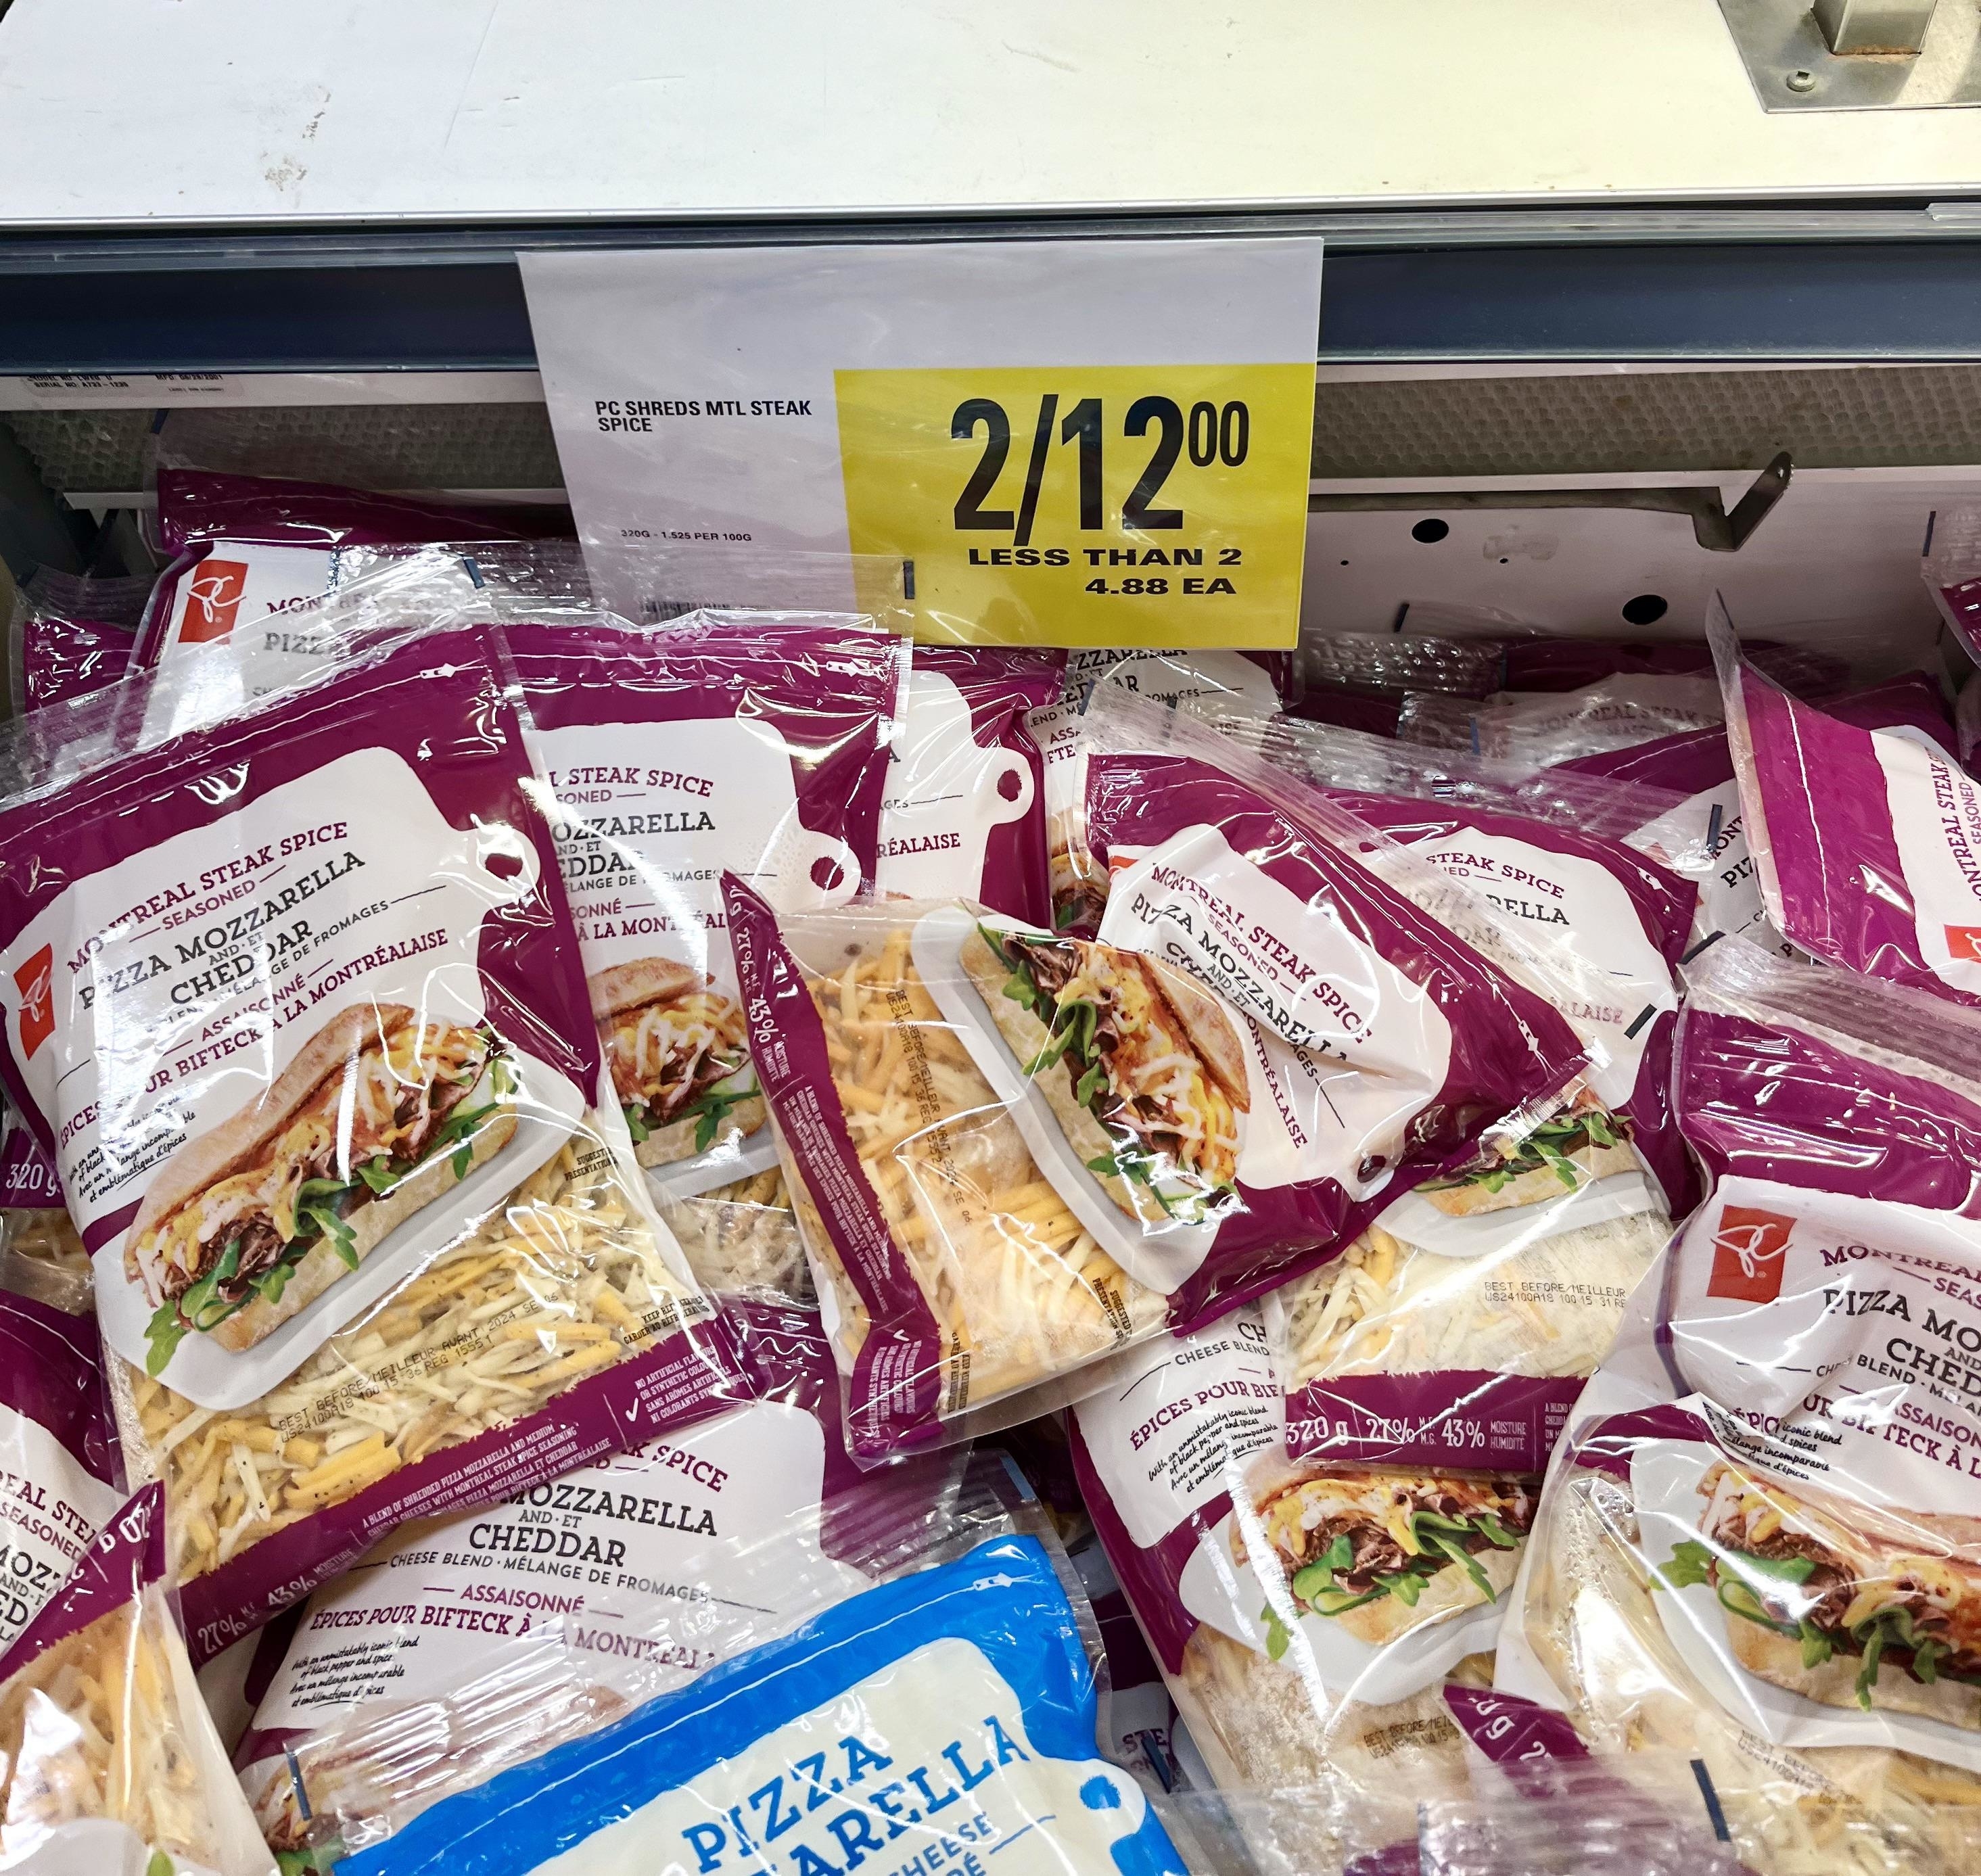 Packages of pizza steak cheese in a store display with a 2 for $12 deal sign above